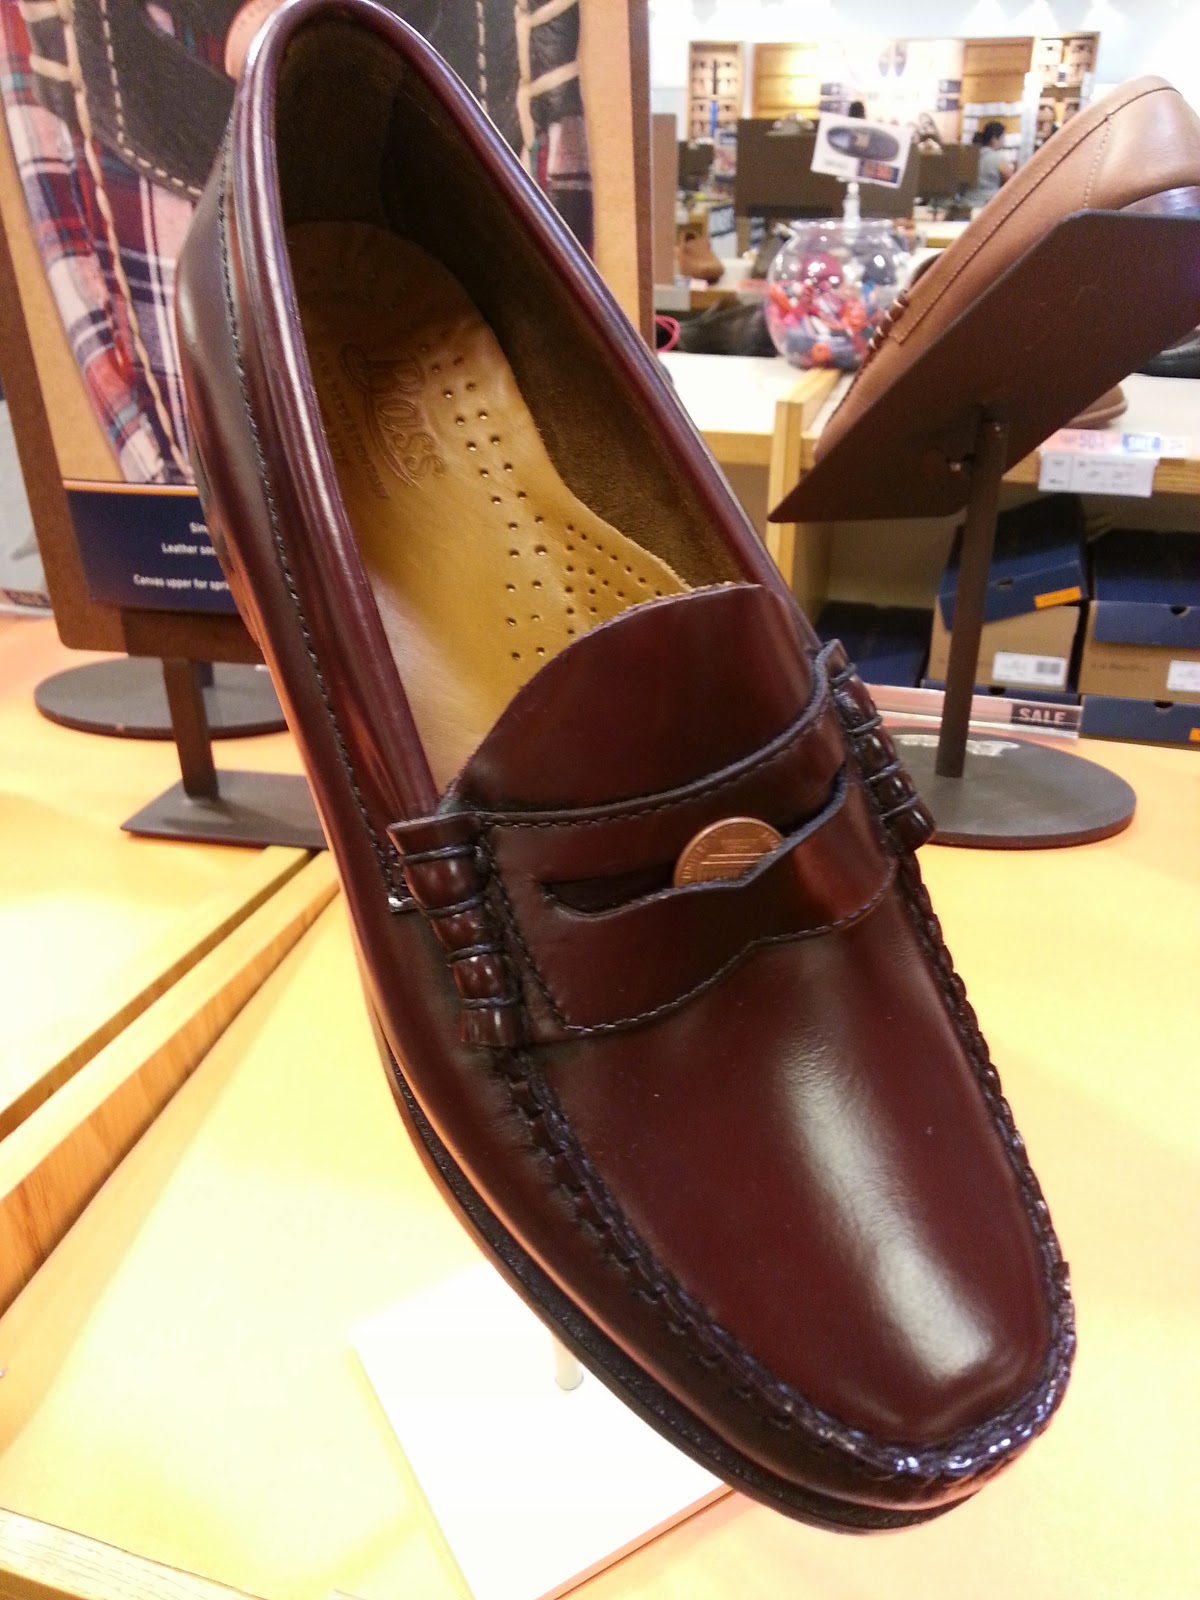 Matthew TW Huang: Penny Loafer